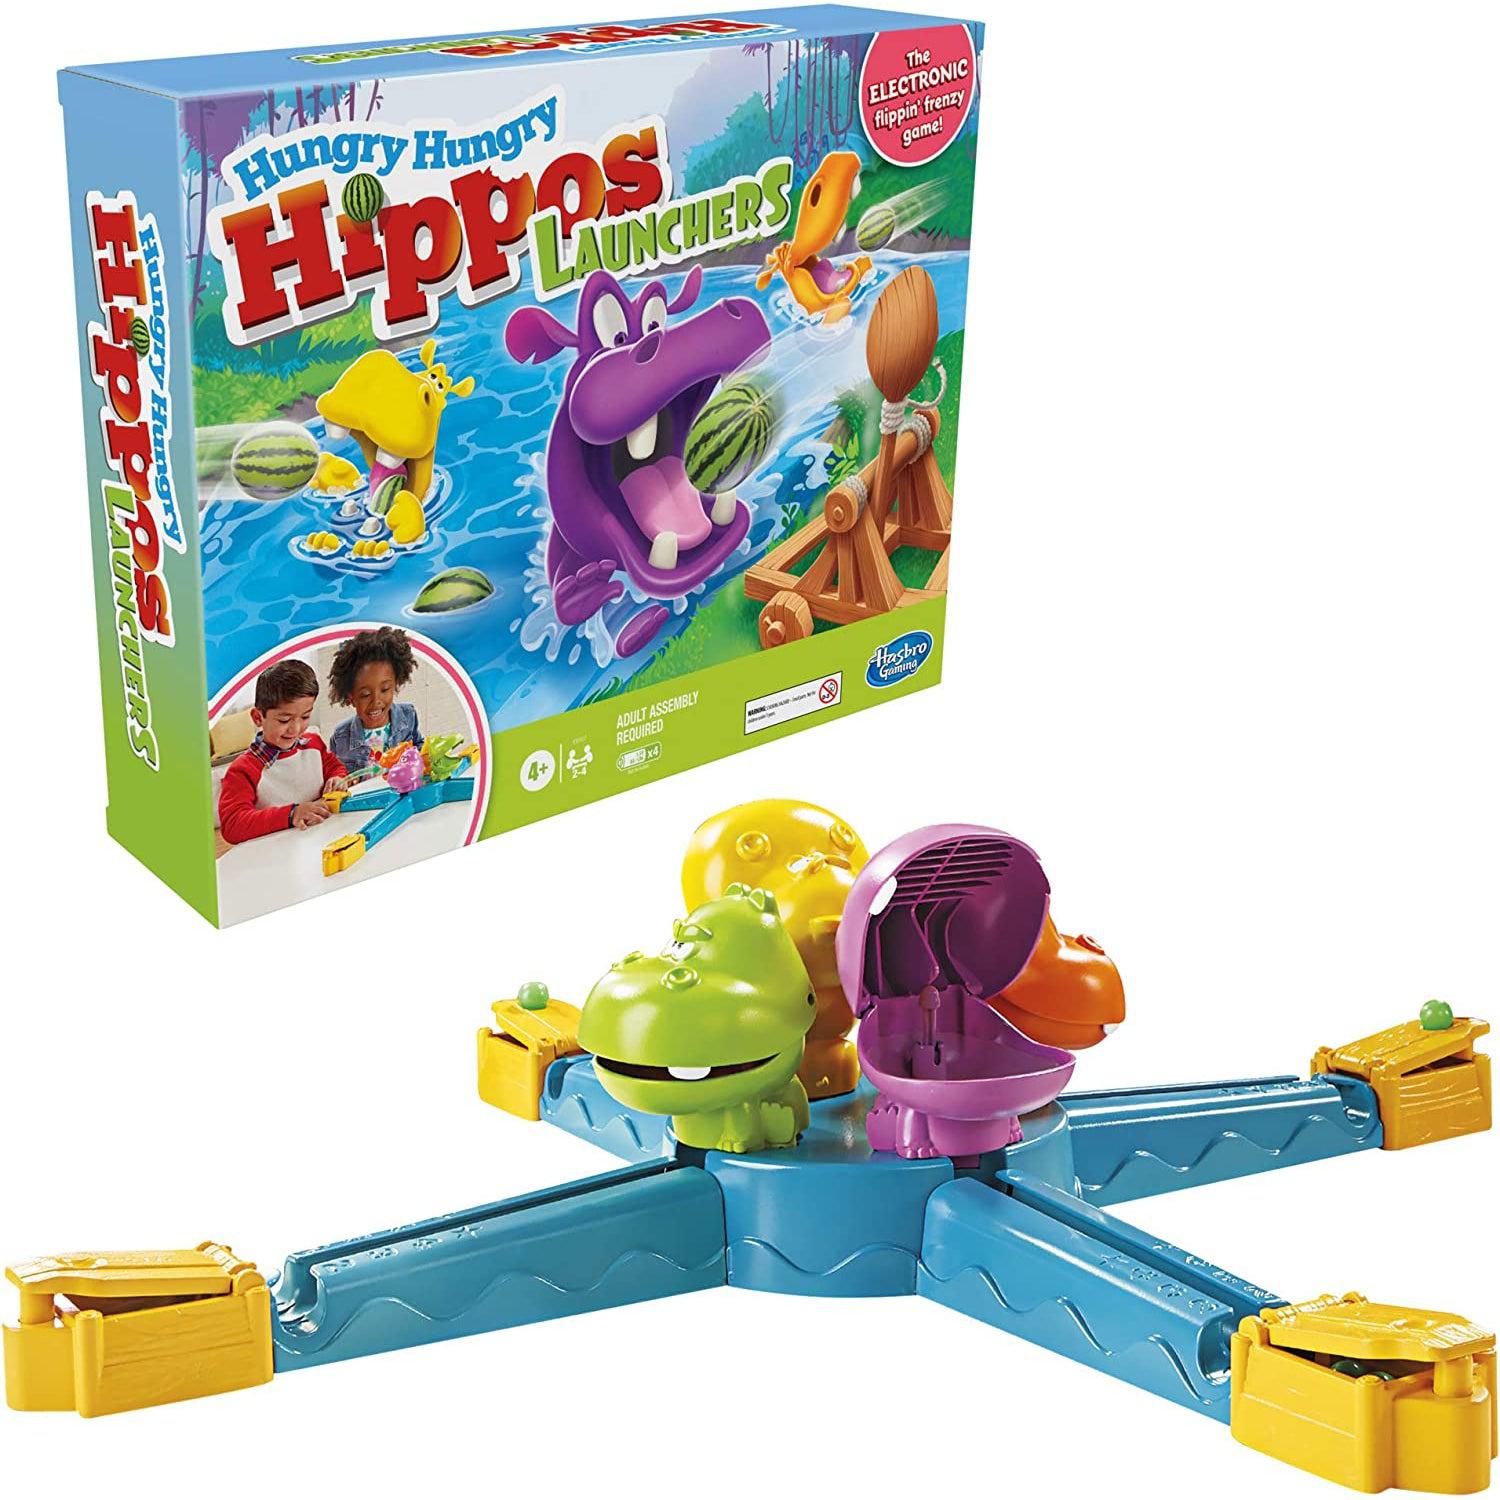 Hasbro-Hungry Hungry Hippos Launchers-E9707-Legacy Toys